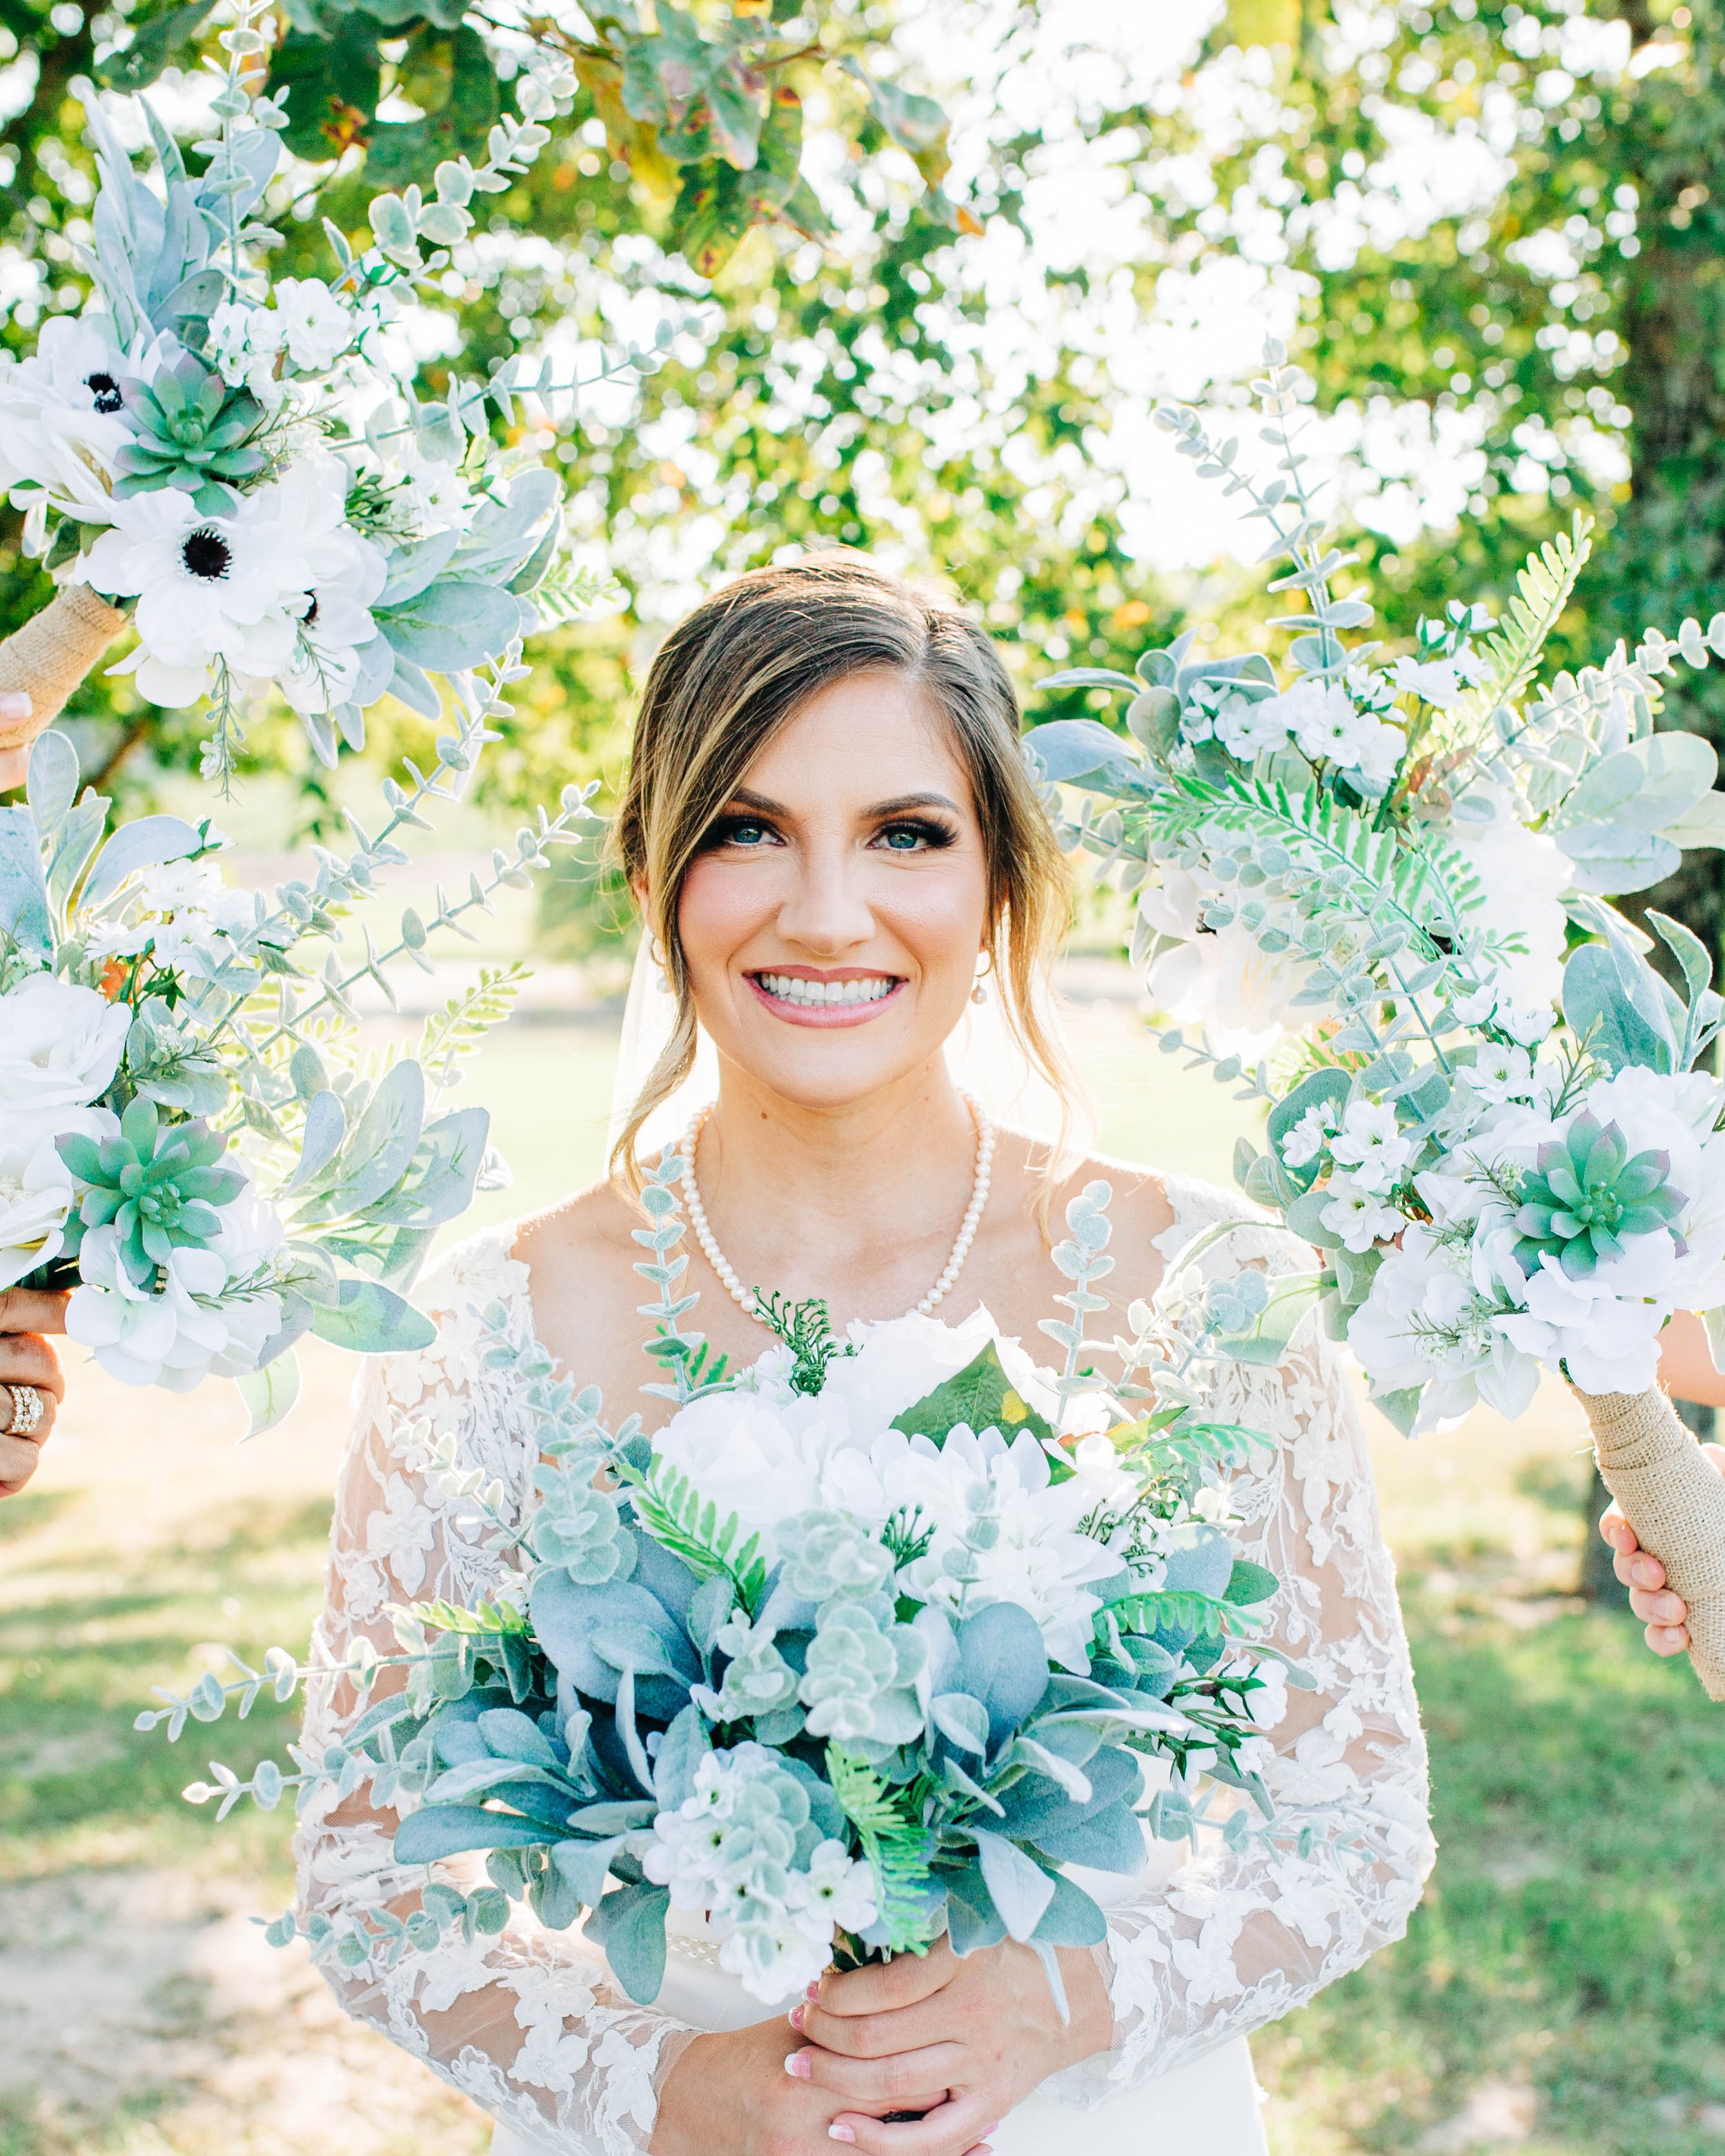 bride with bridesmaids bouquets around her face dusty blue flowers.jpg